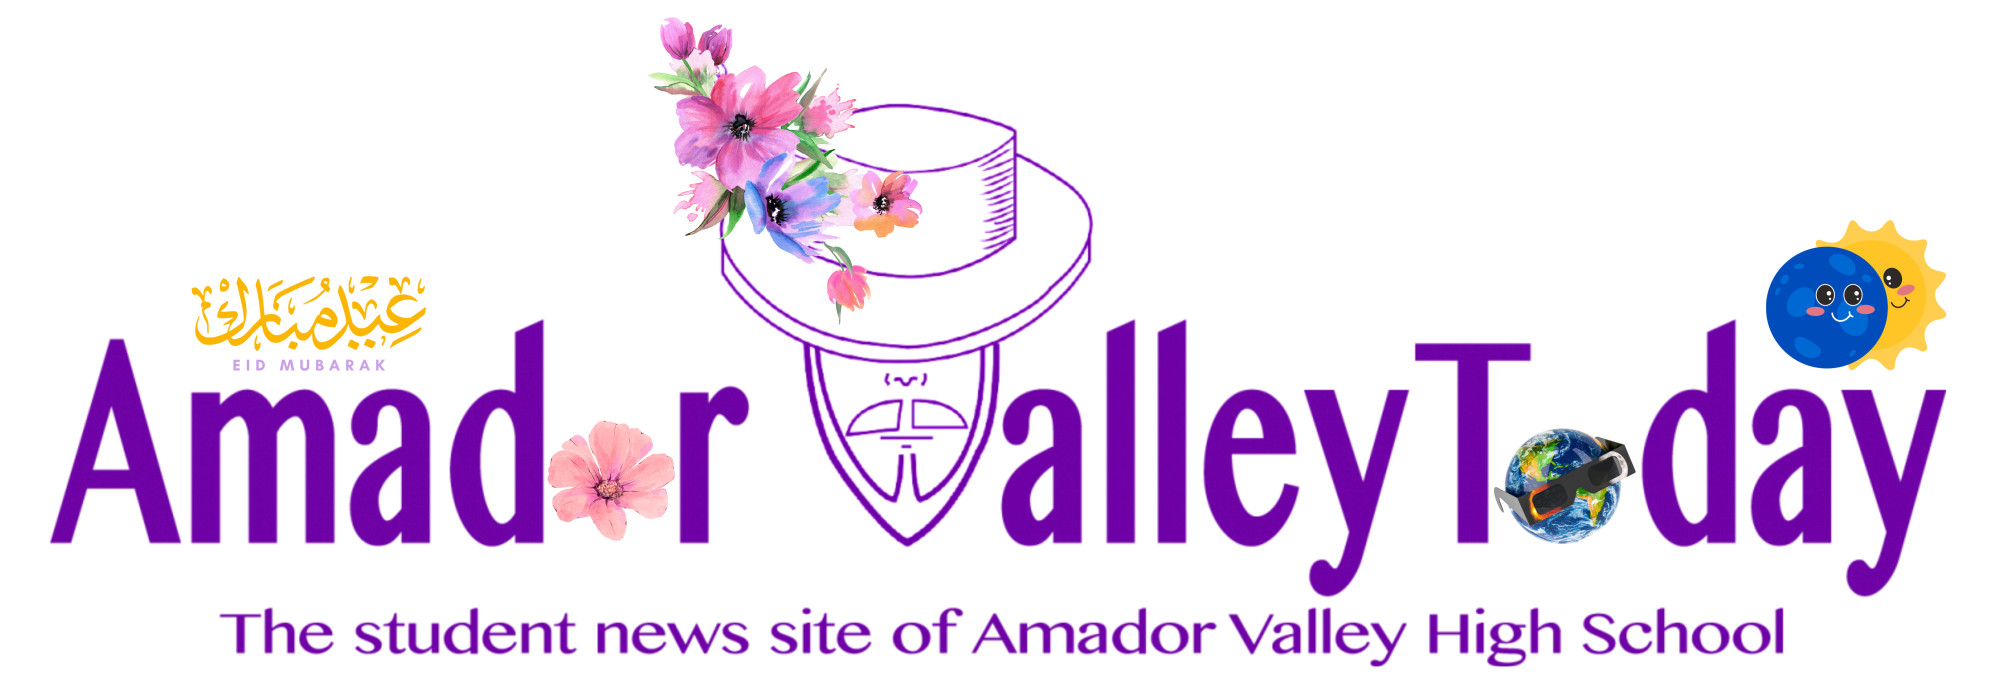 The student news site of Amador Valley High School